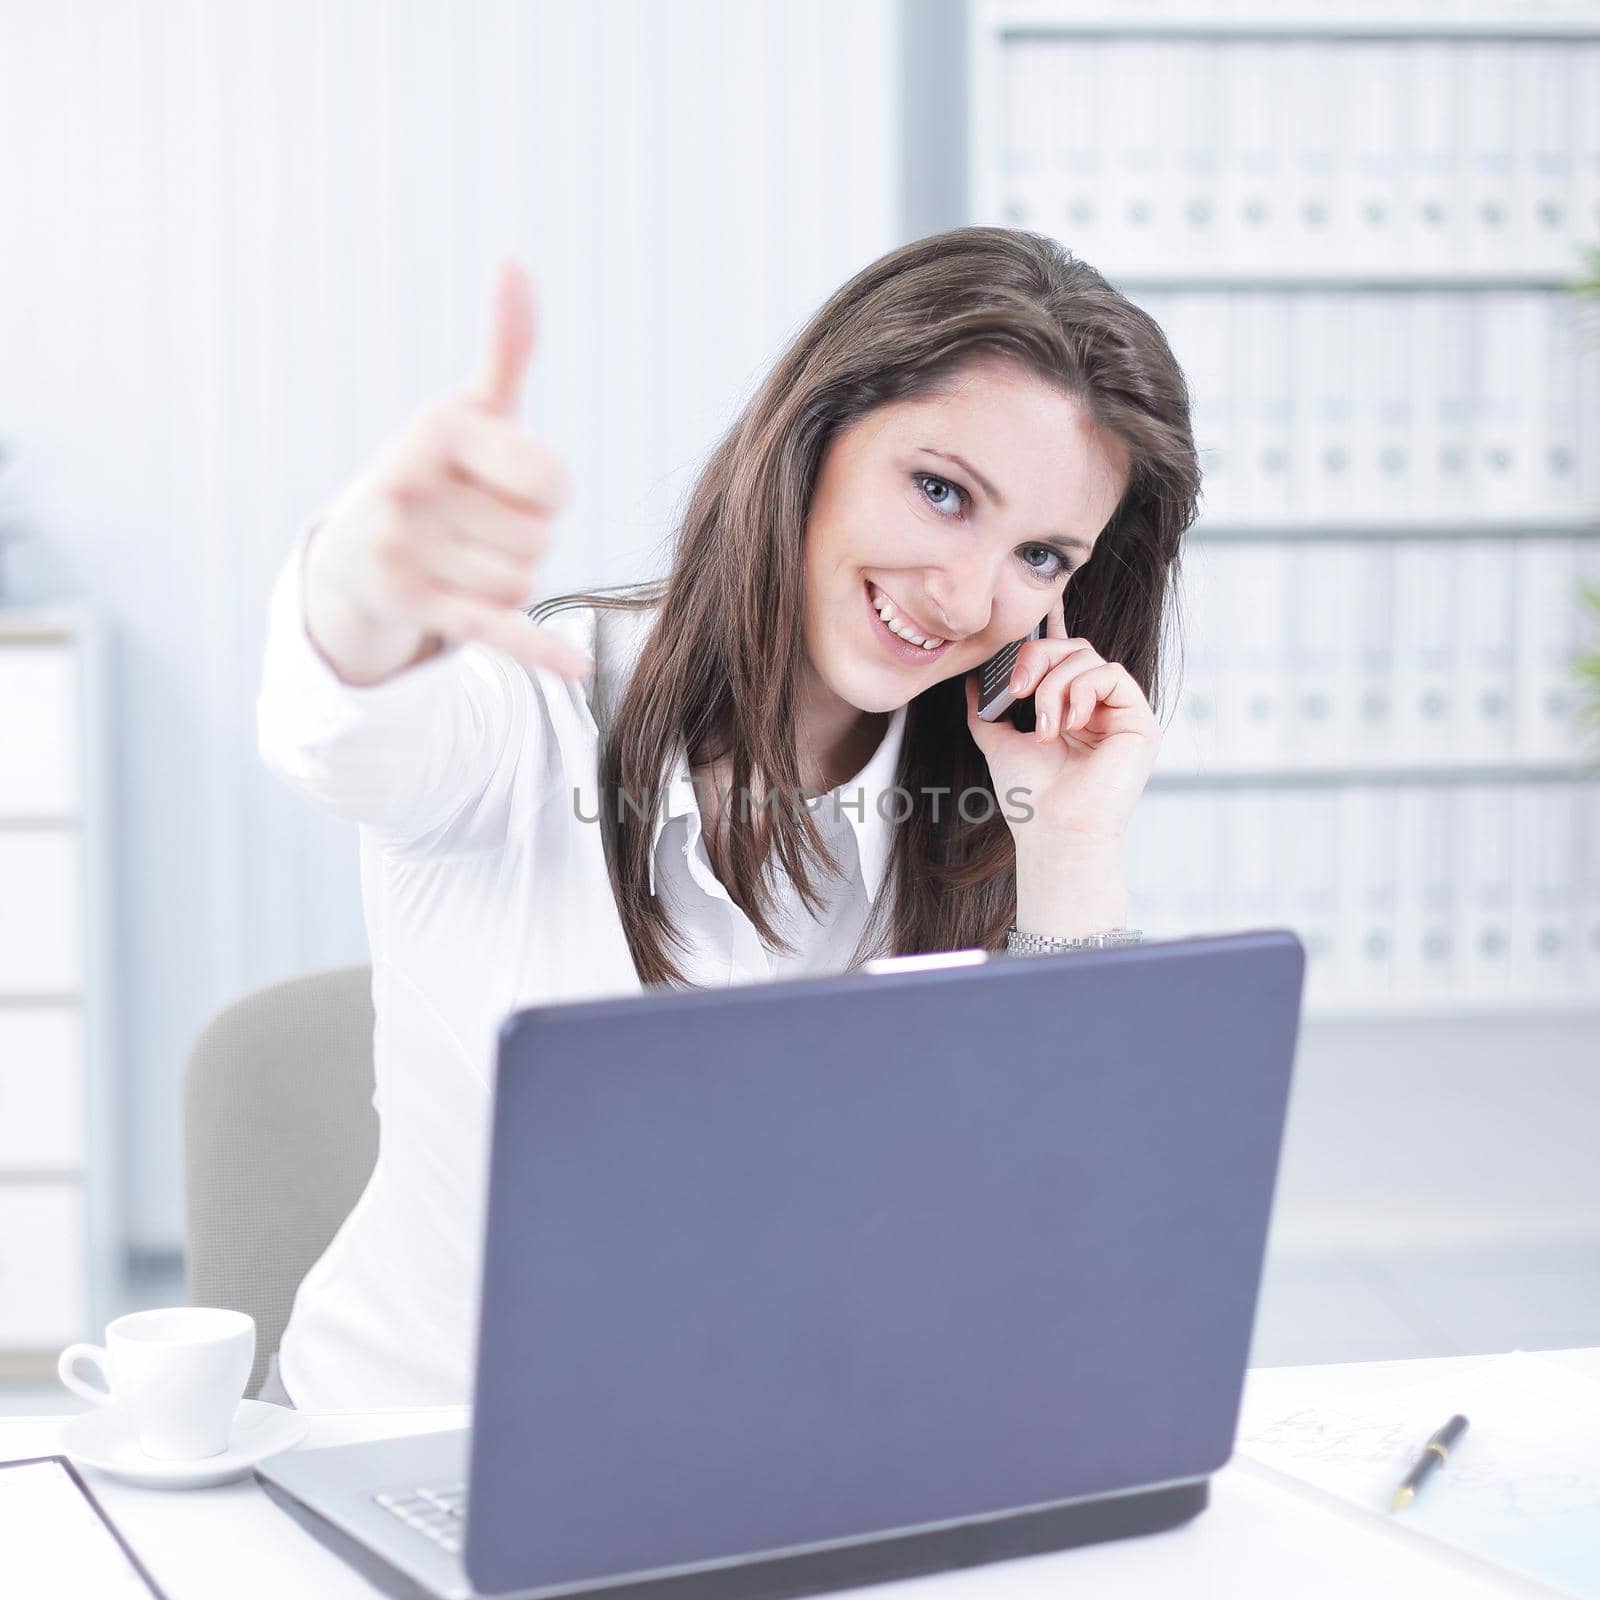 successful business woman showing thumb up in the workplace by SmartPhotoLab